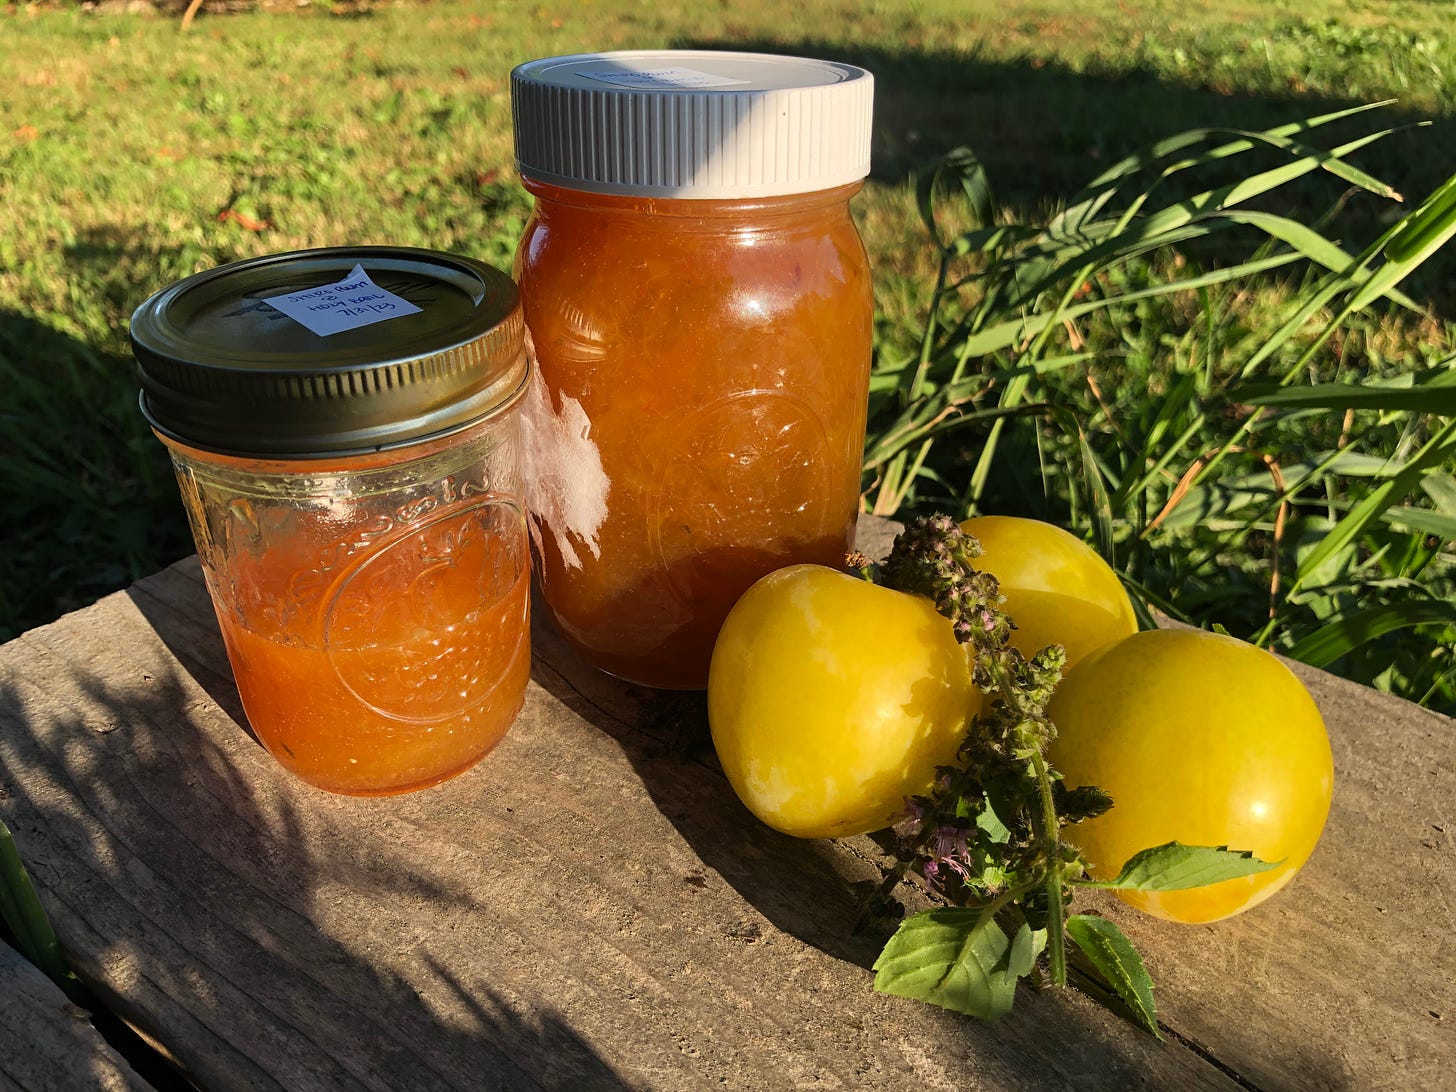 two beautiful jars of marigold-colored jam next to a pile of three shiro plums with a spring of tulsi (sacred/holy basil)